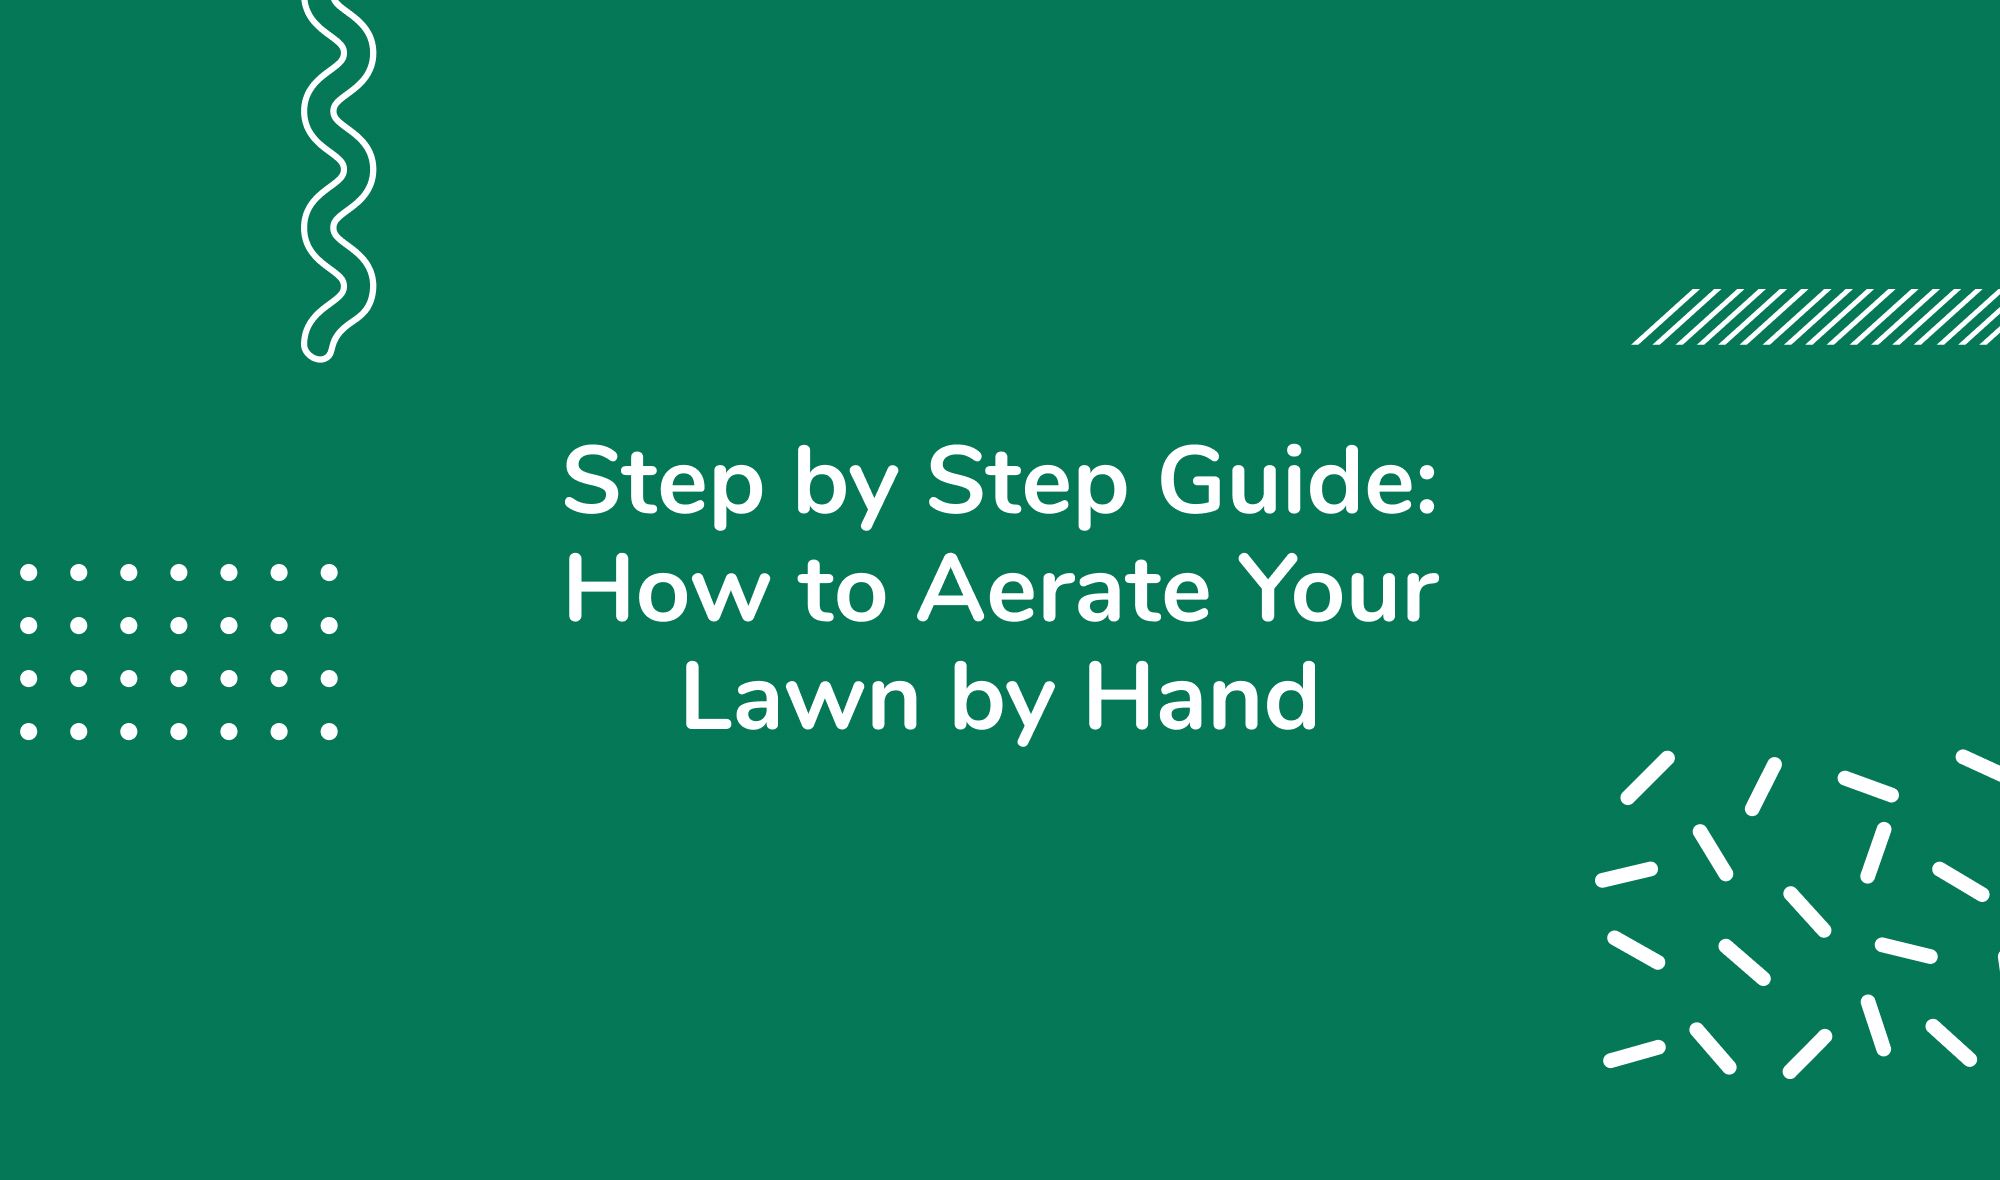 Step by Step Guide: How to Aerate Lawn by Hand